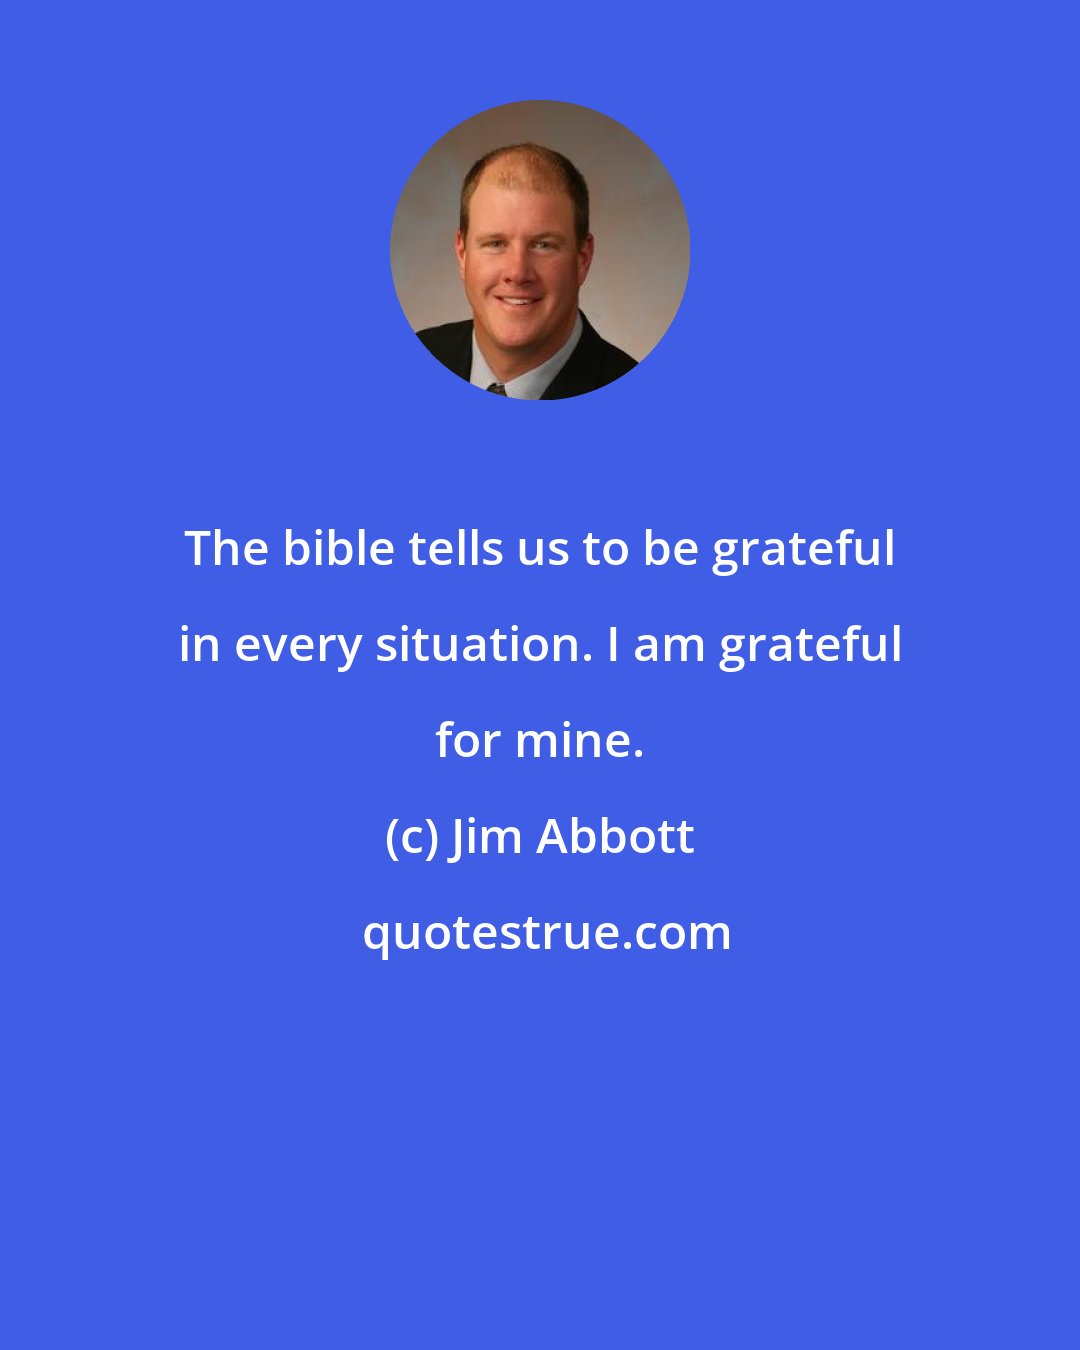 Jim Abbott: The bible tells us to be grateful in every situation. I am grateful for mine.